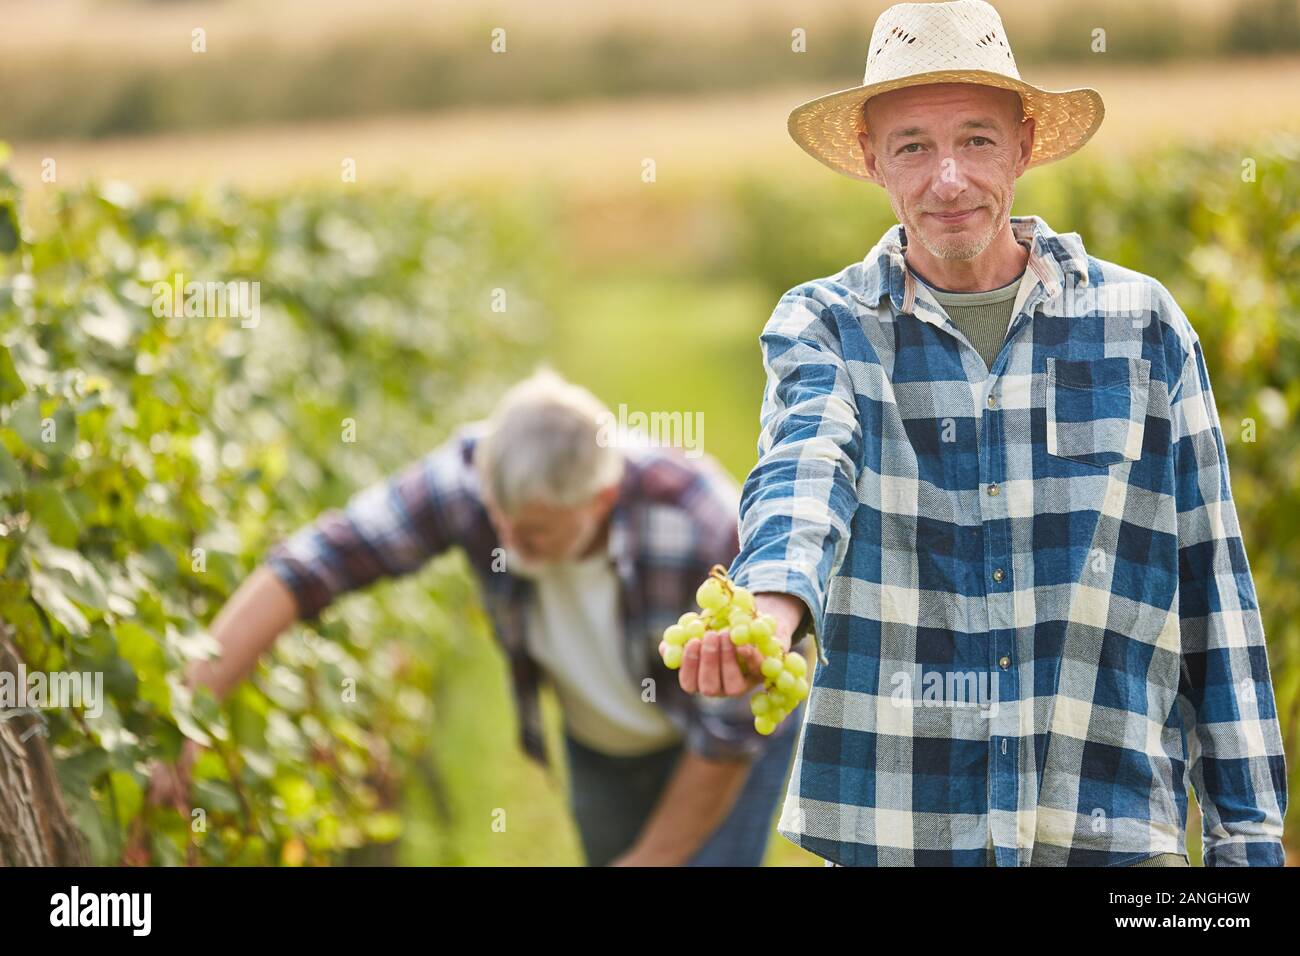 Winegrowers harvesting grapes shows a vine with white grapes Stock Photo